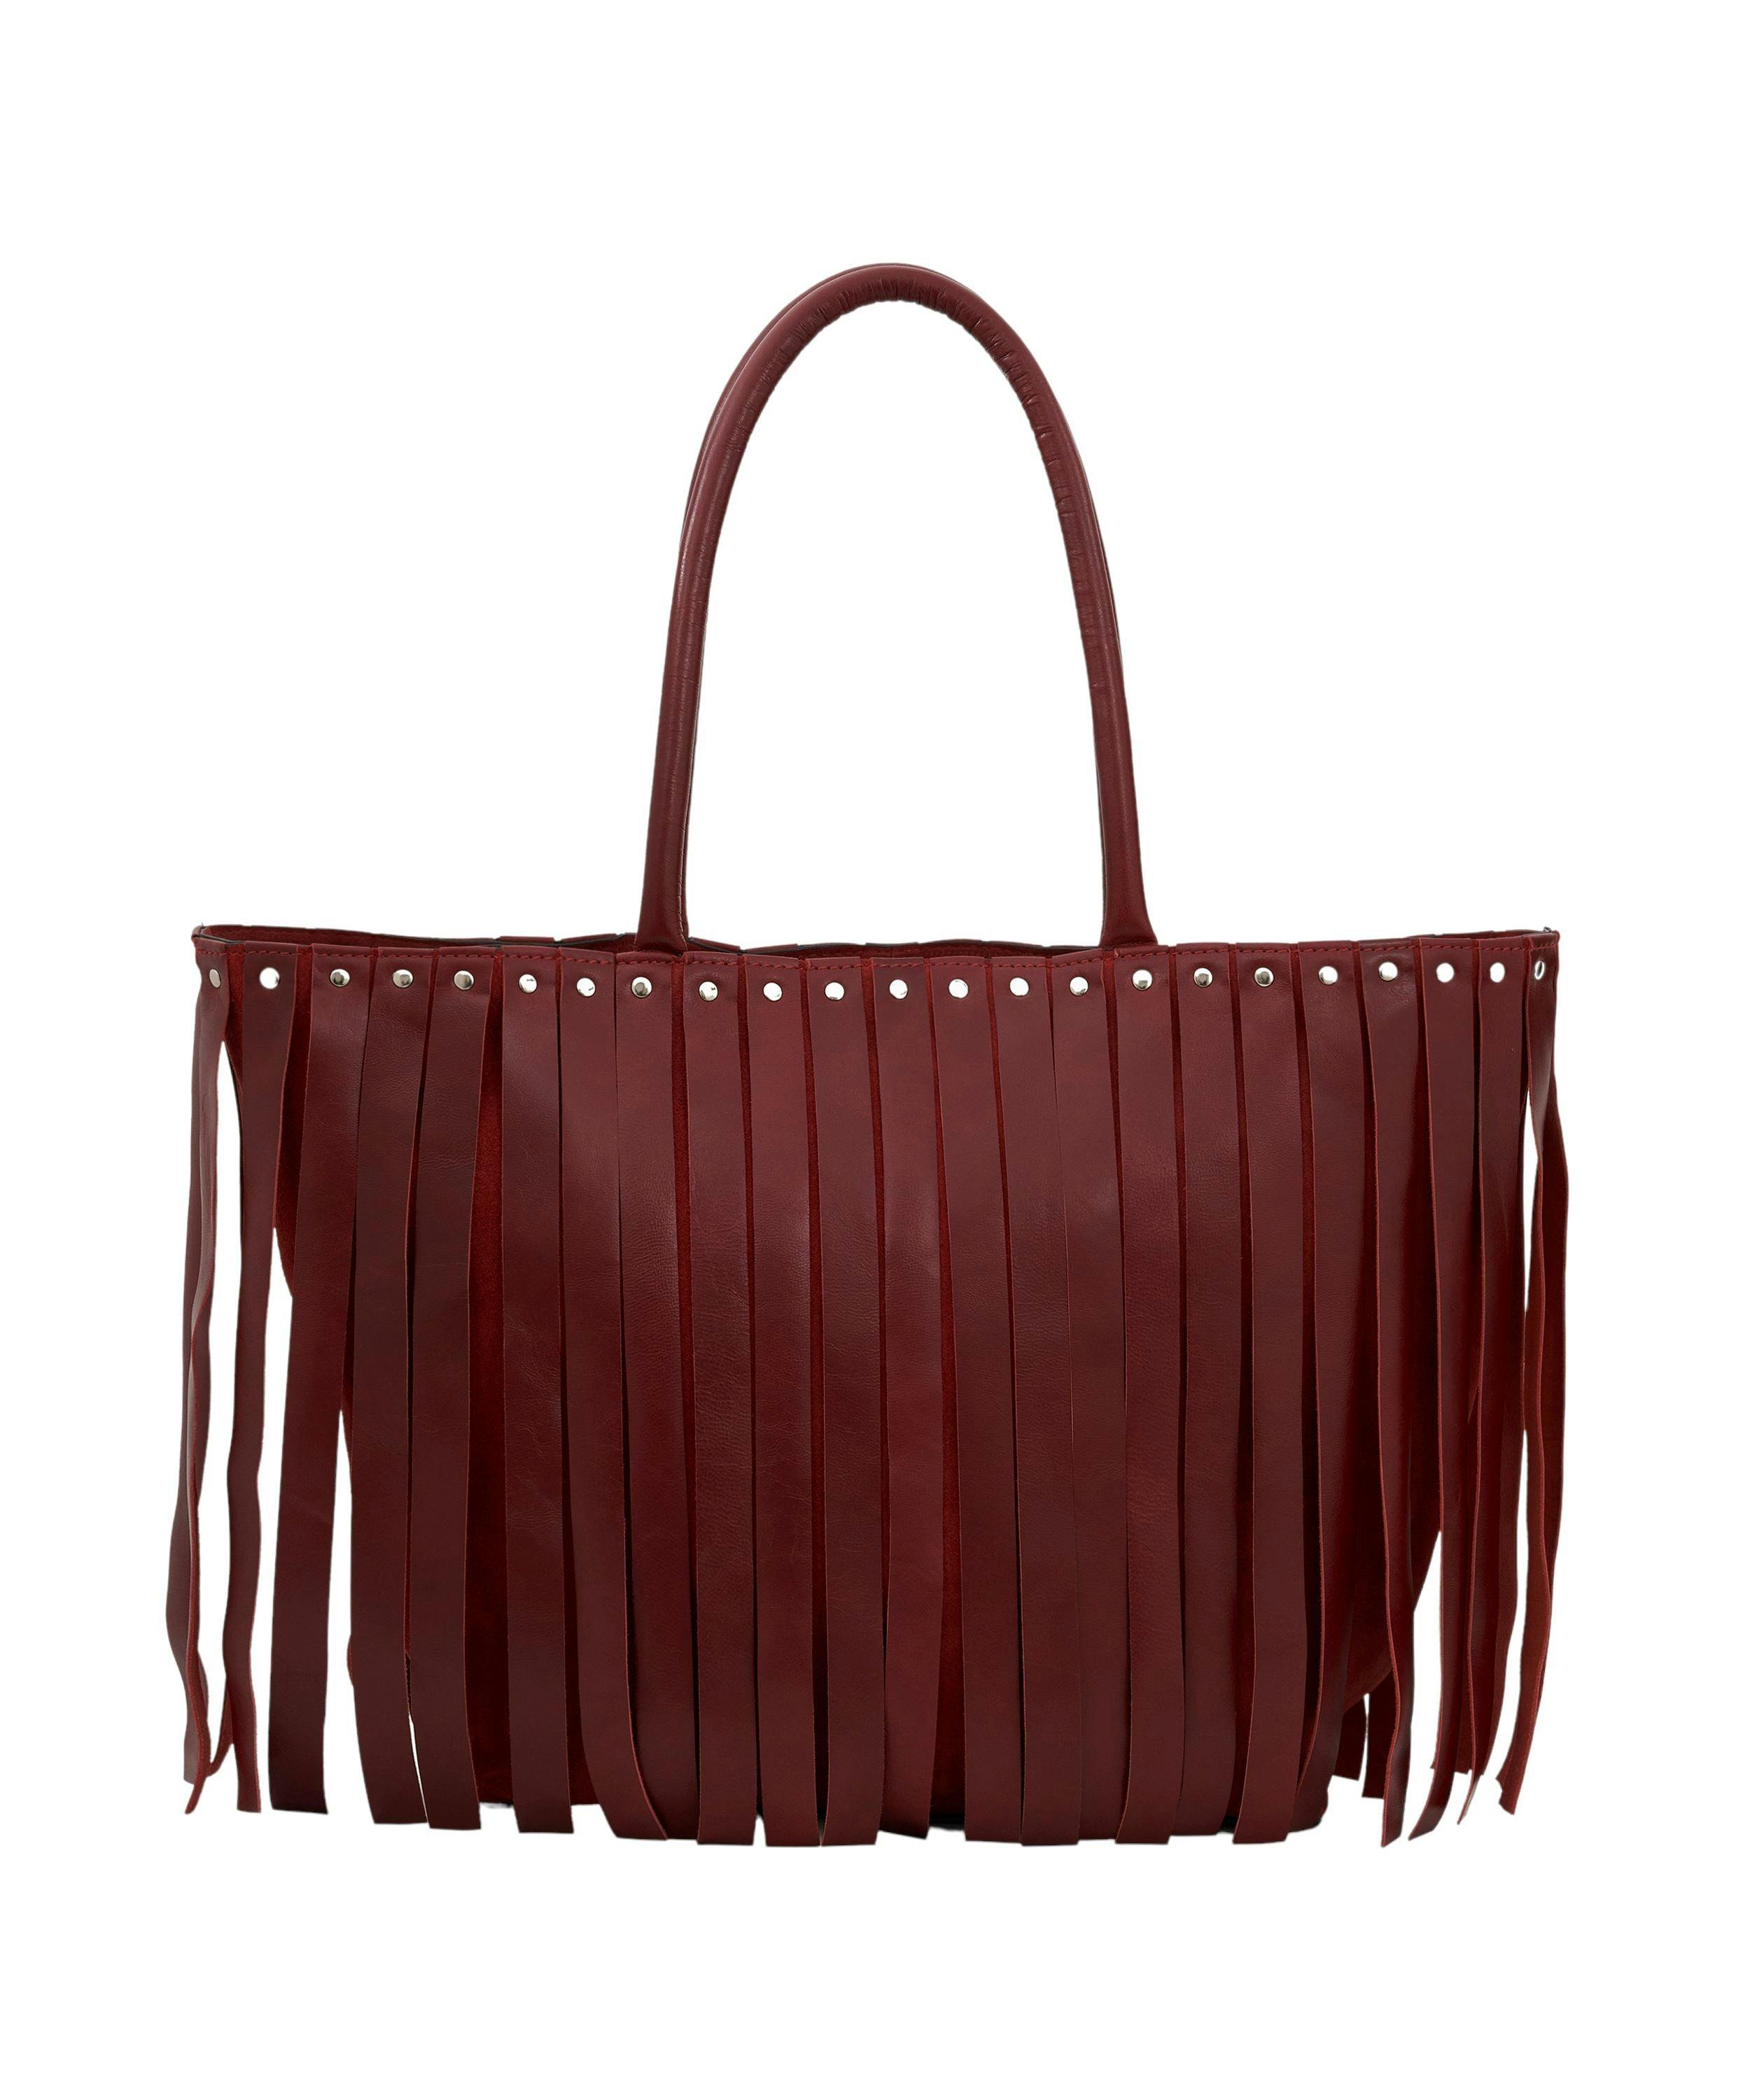 Tassel Tango Tote in Blood Red with Stud Details, a product by Mistry 